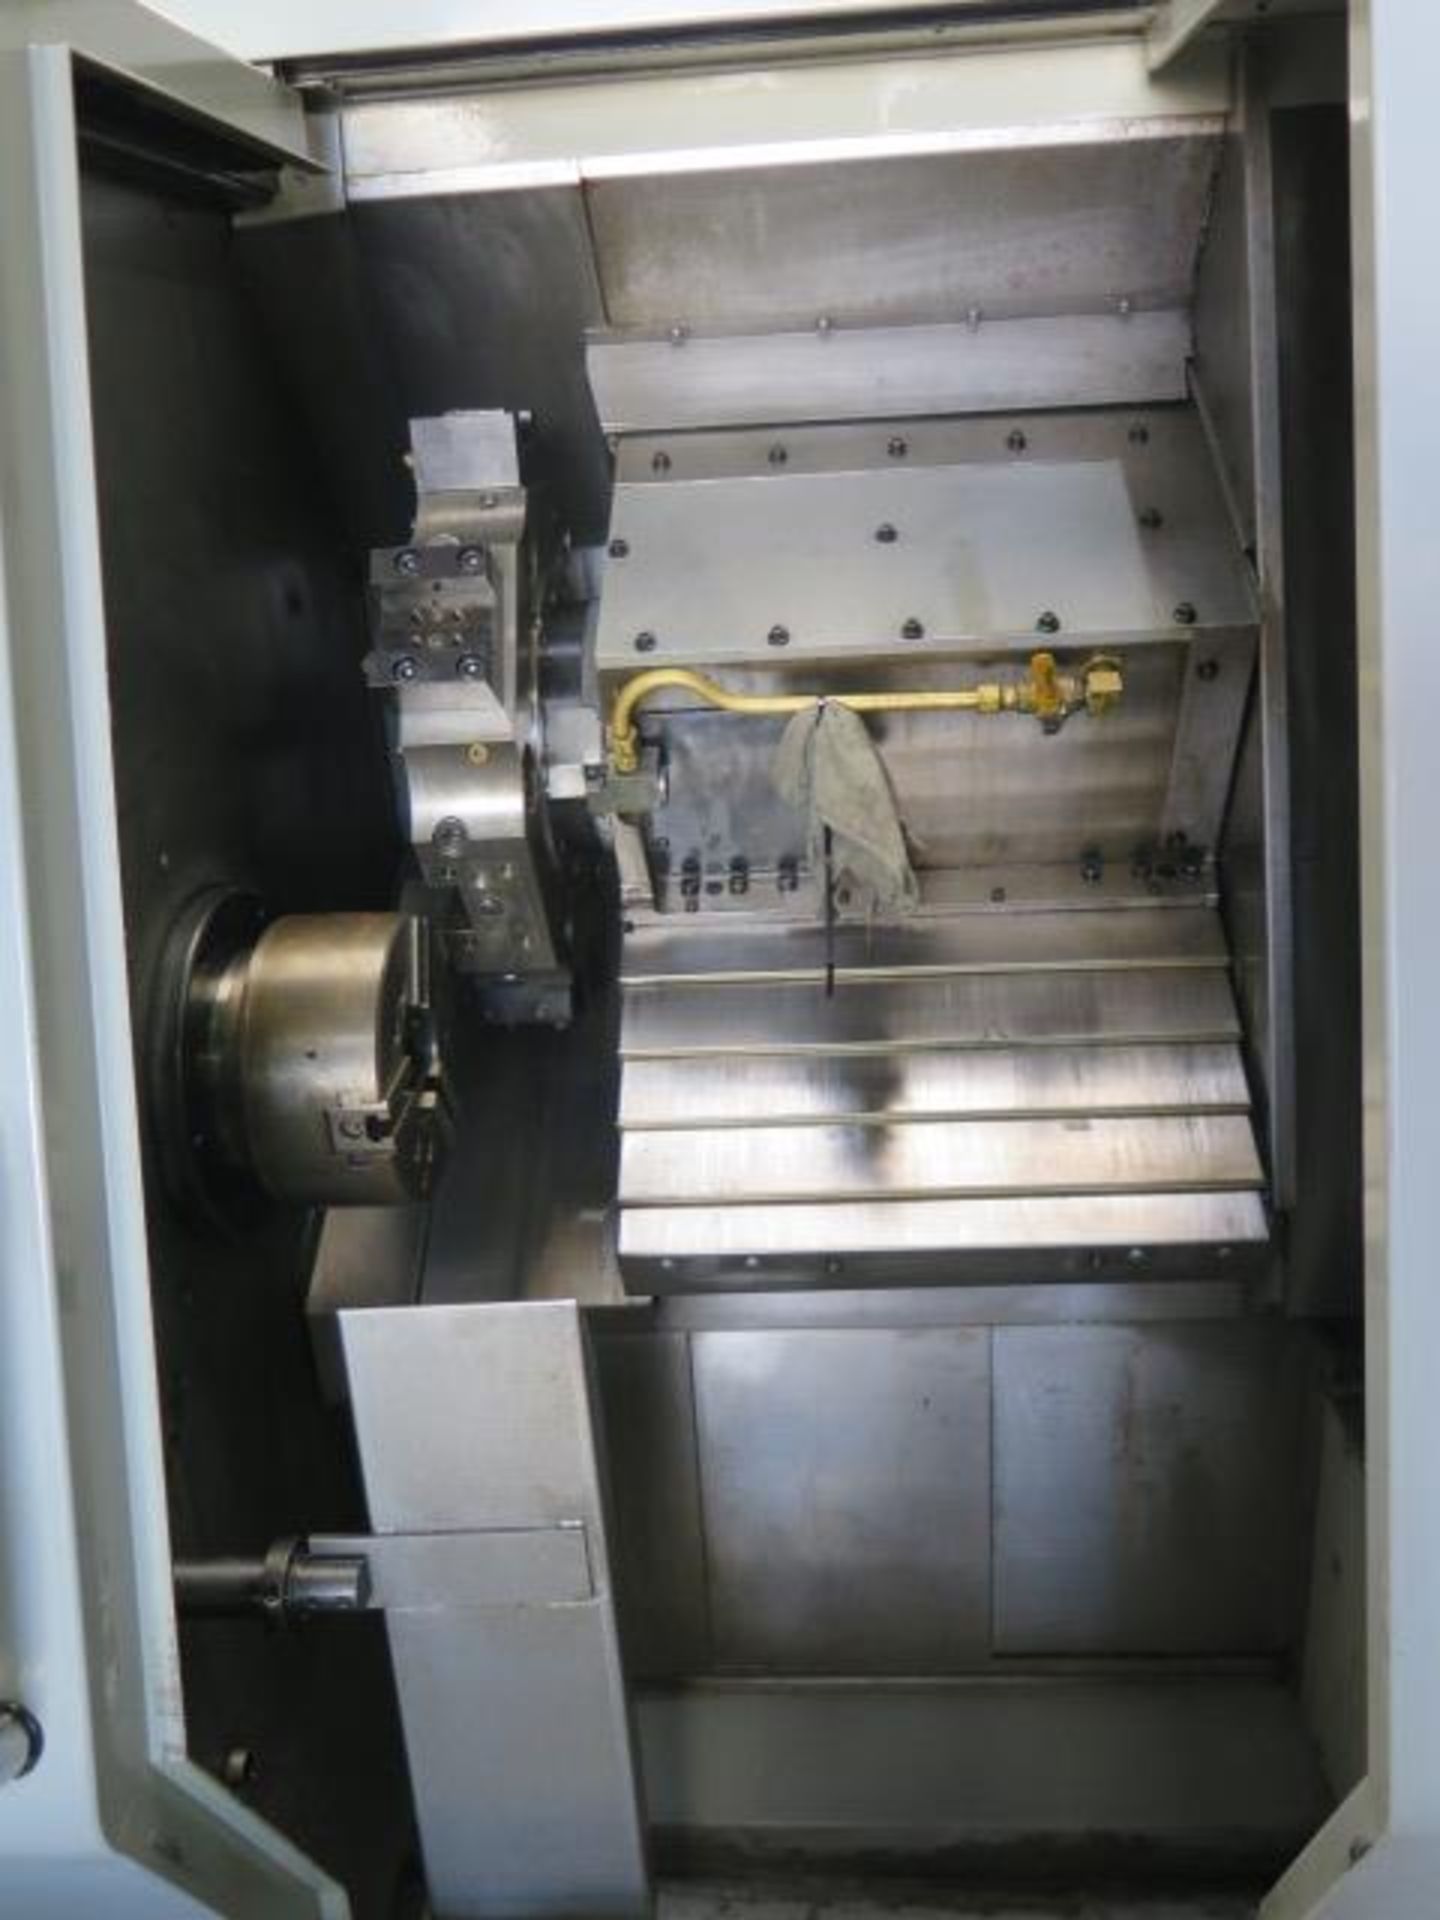 2006 Haas SL-20T CNC turning center s/n 3082959, 12-Station Turret, Tailstock, SOLD AS IS - Image 4 of 15